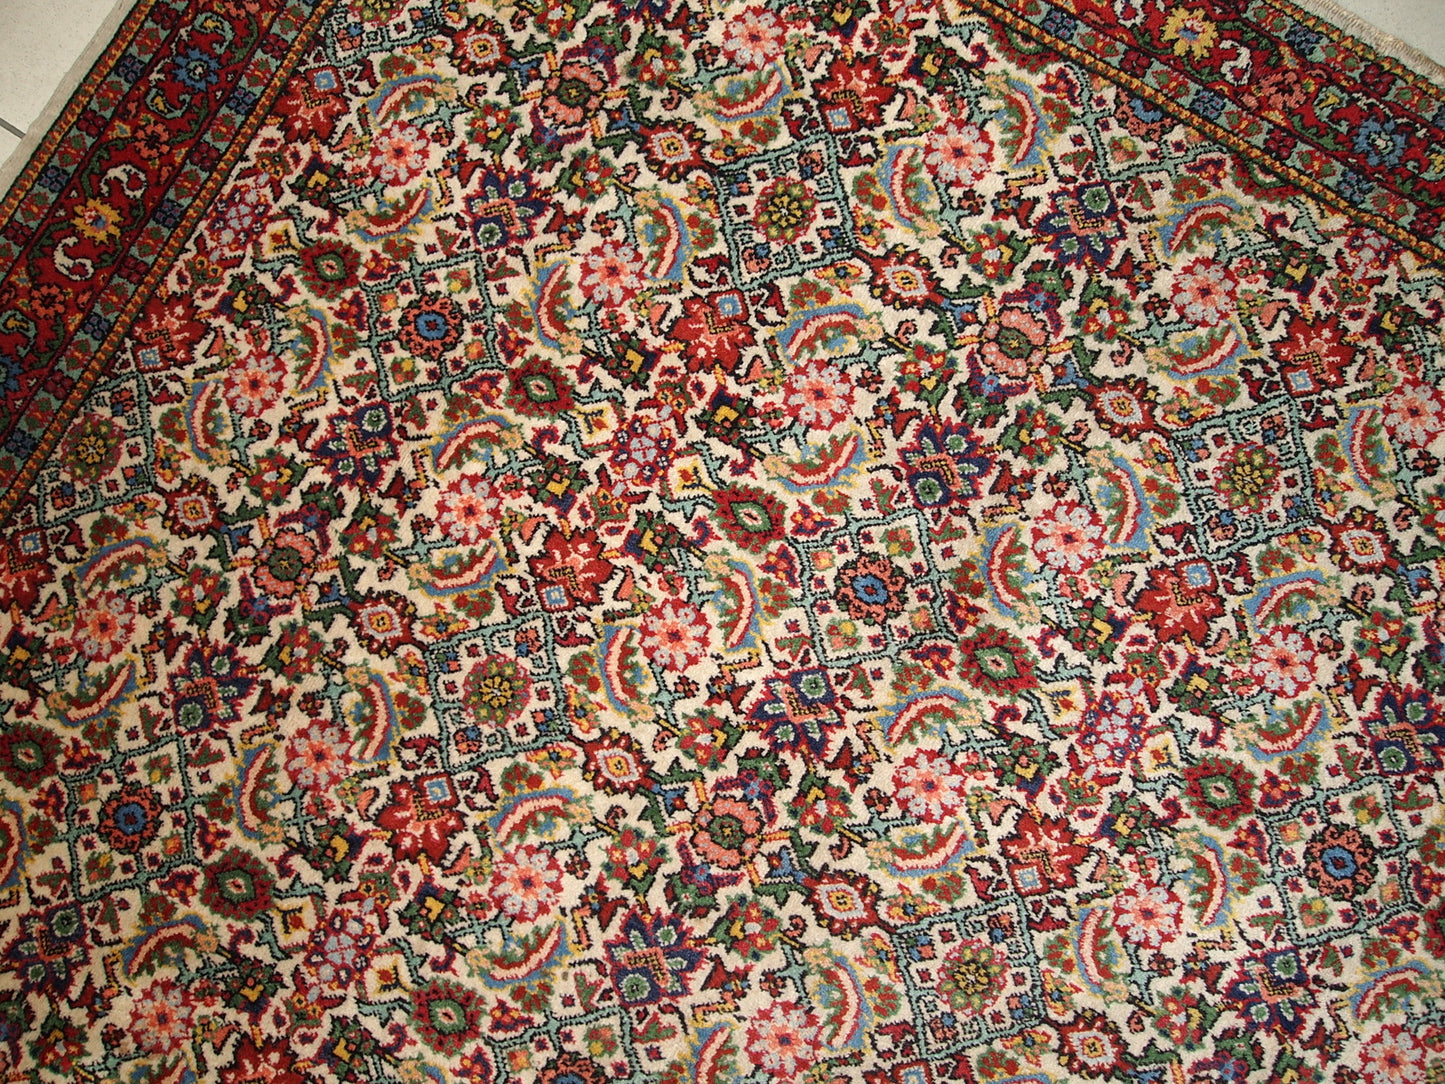 Antique rug with vibrant red, pink, green, and blue colors